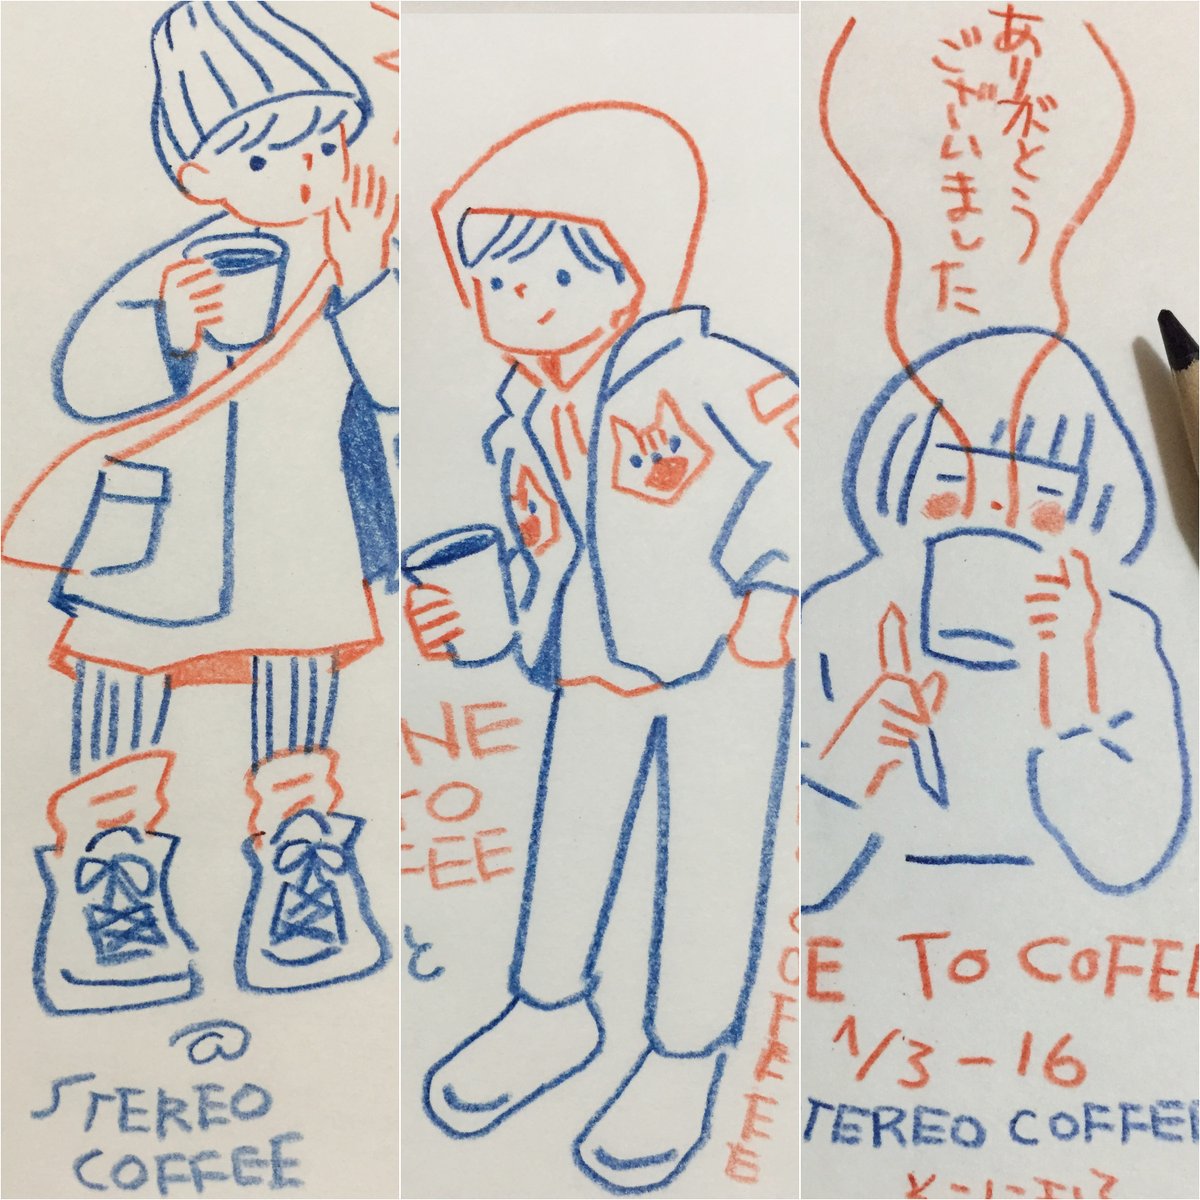 ZINE TO COFFEE
告知用イラスト
1/10〜1/16まとめ
※無事終了いたしました

お世話になりました
ありがとうございました。
STEREO COFFEE(福岡市中央区渡辺通3丁目8-3)
10:00-21:00 定休日 水曜日 